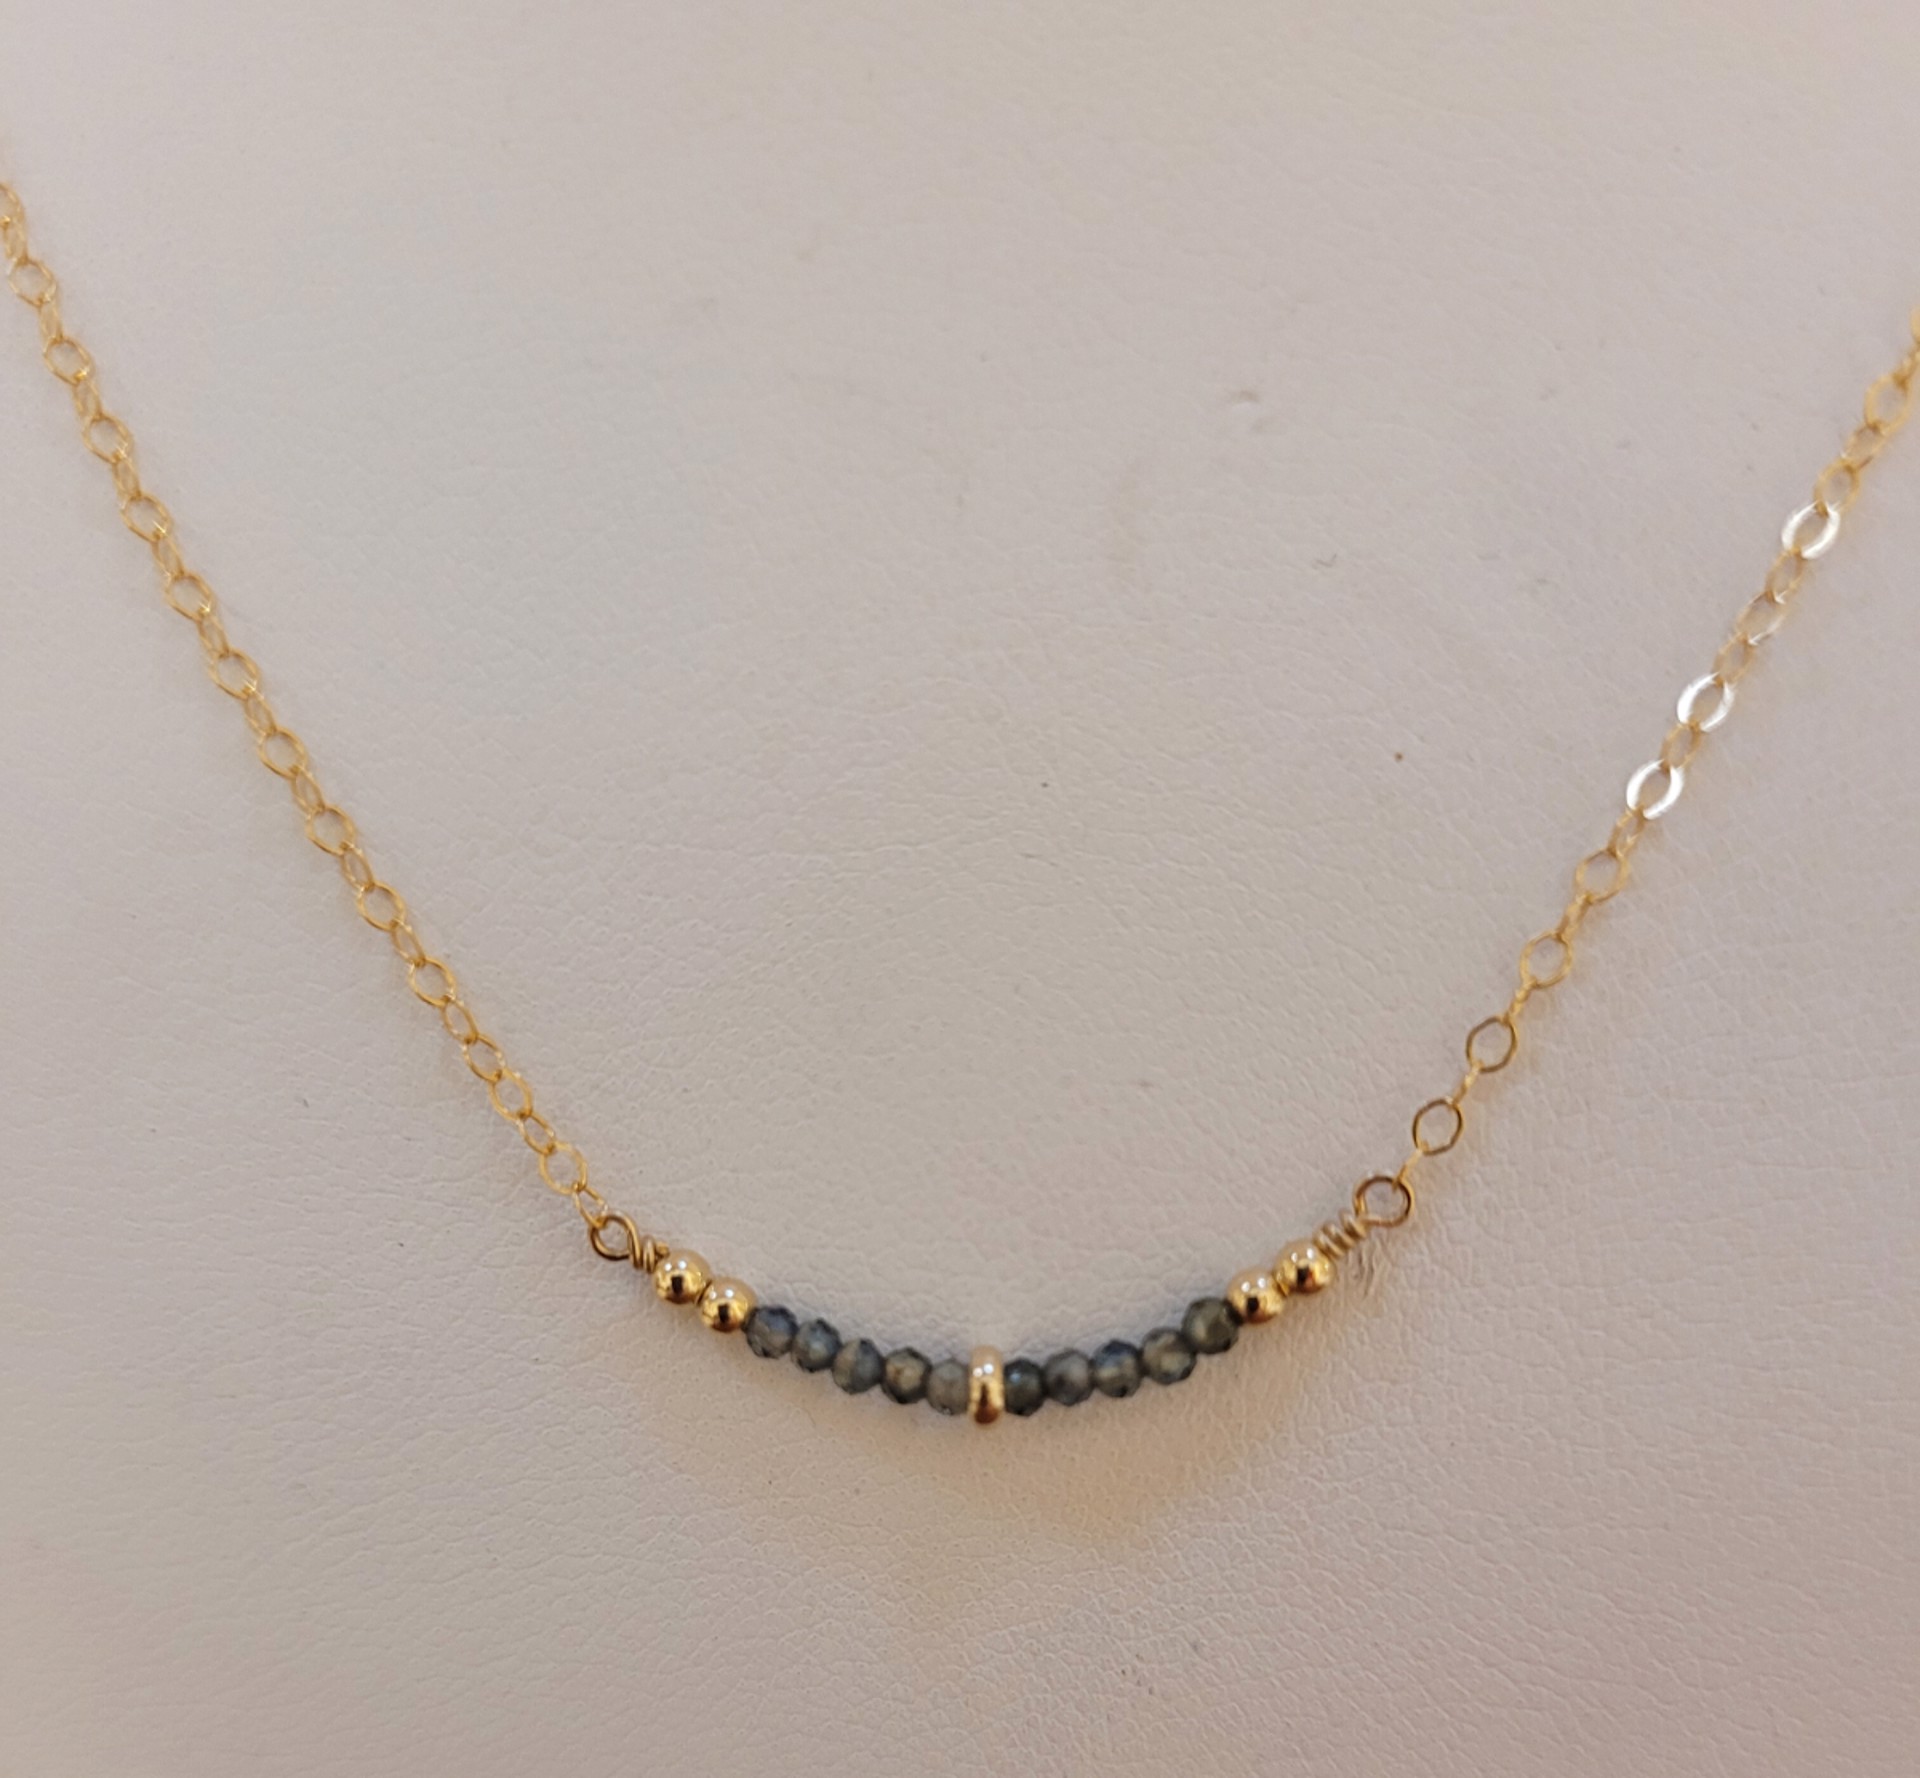 Necklace - Peacock Saffire Crescent 14K Gold Filled by Julia Balestracci